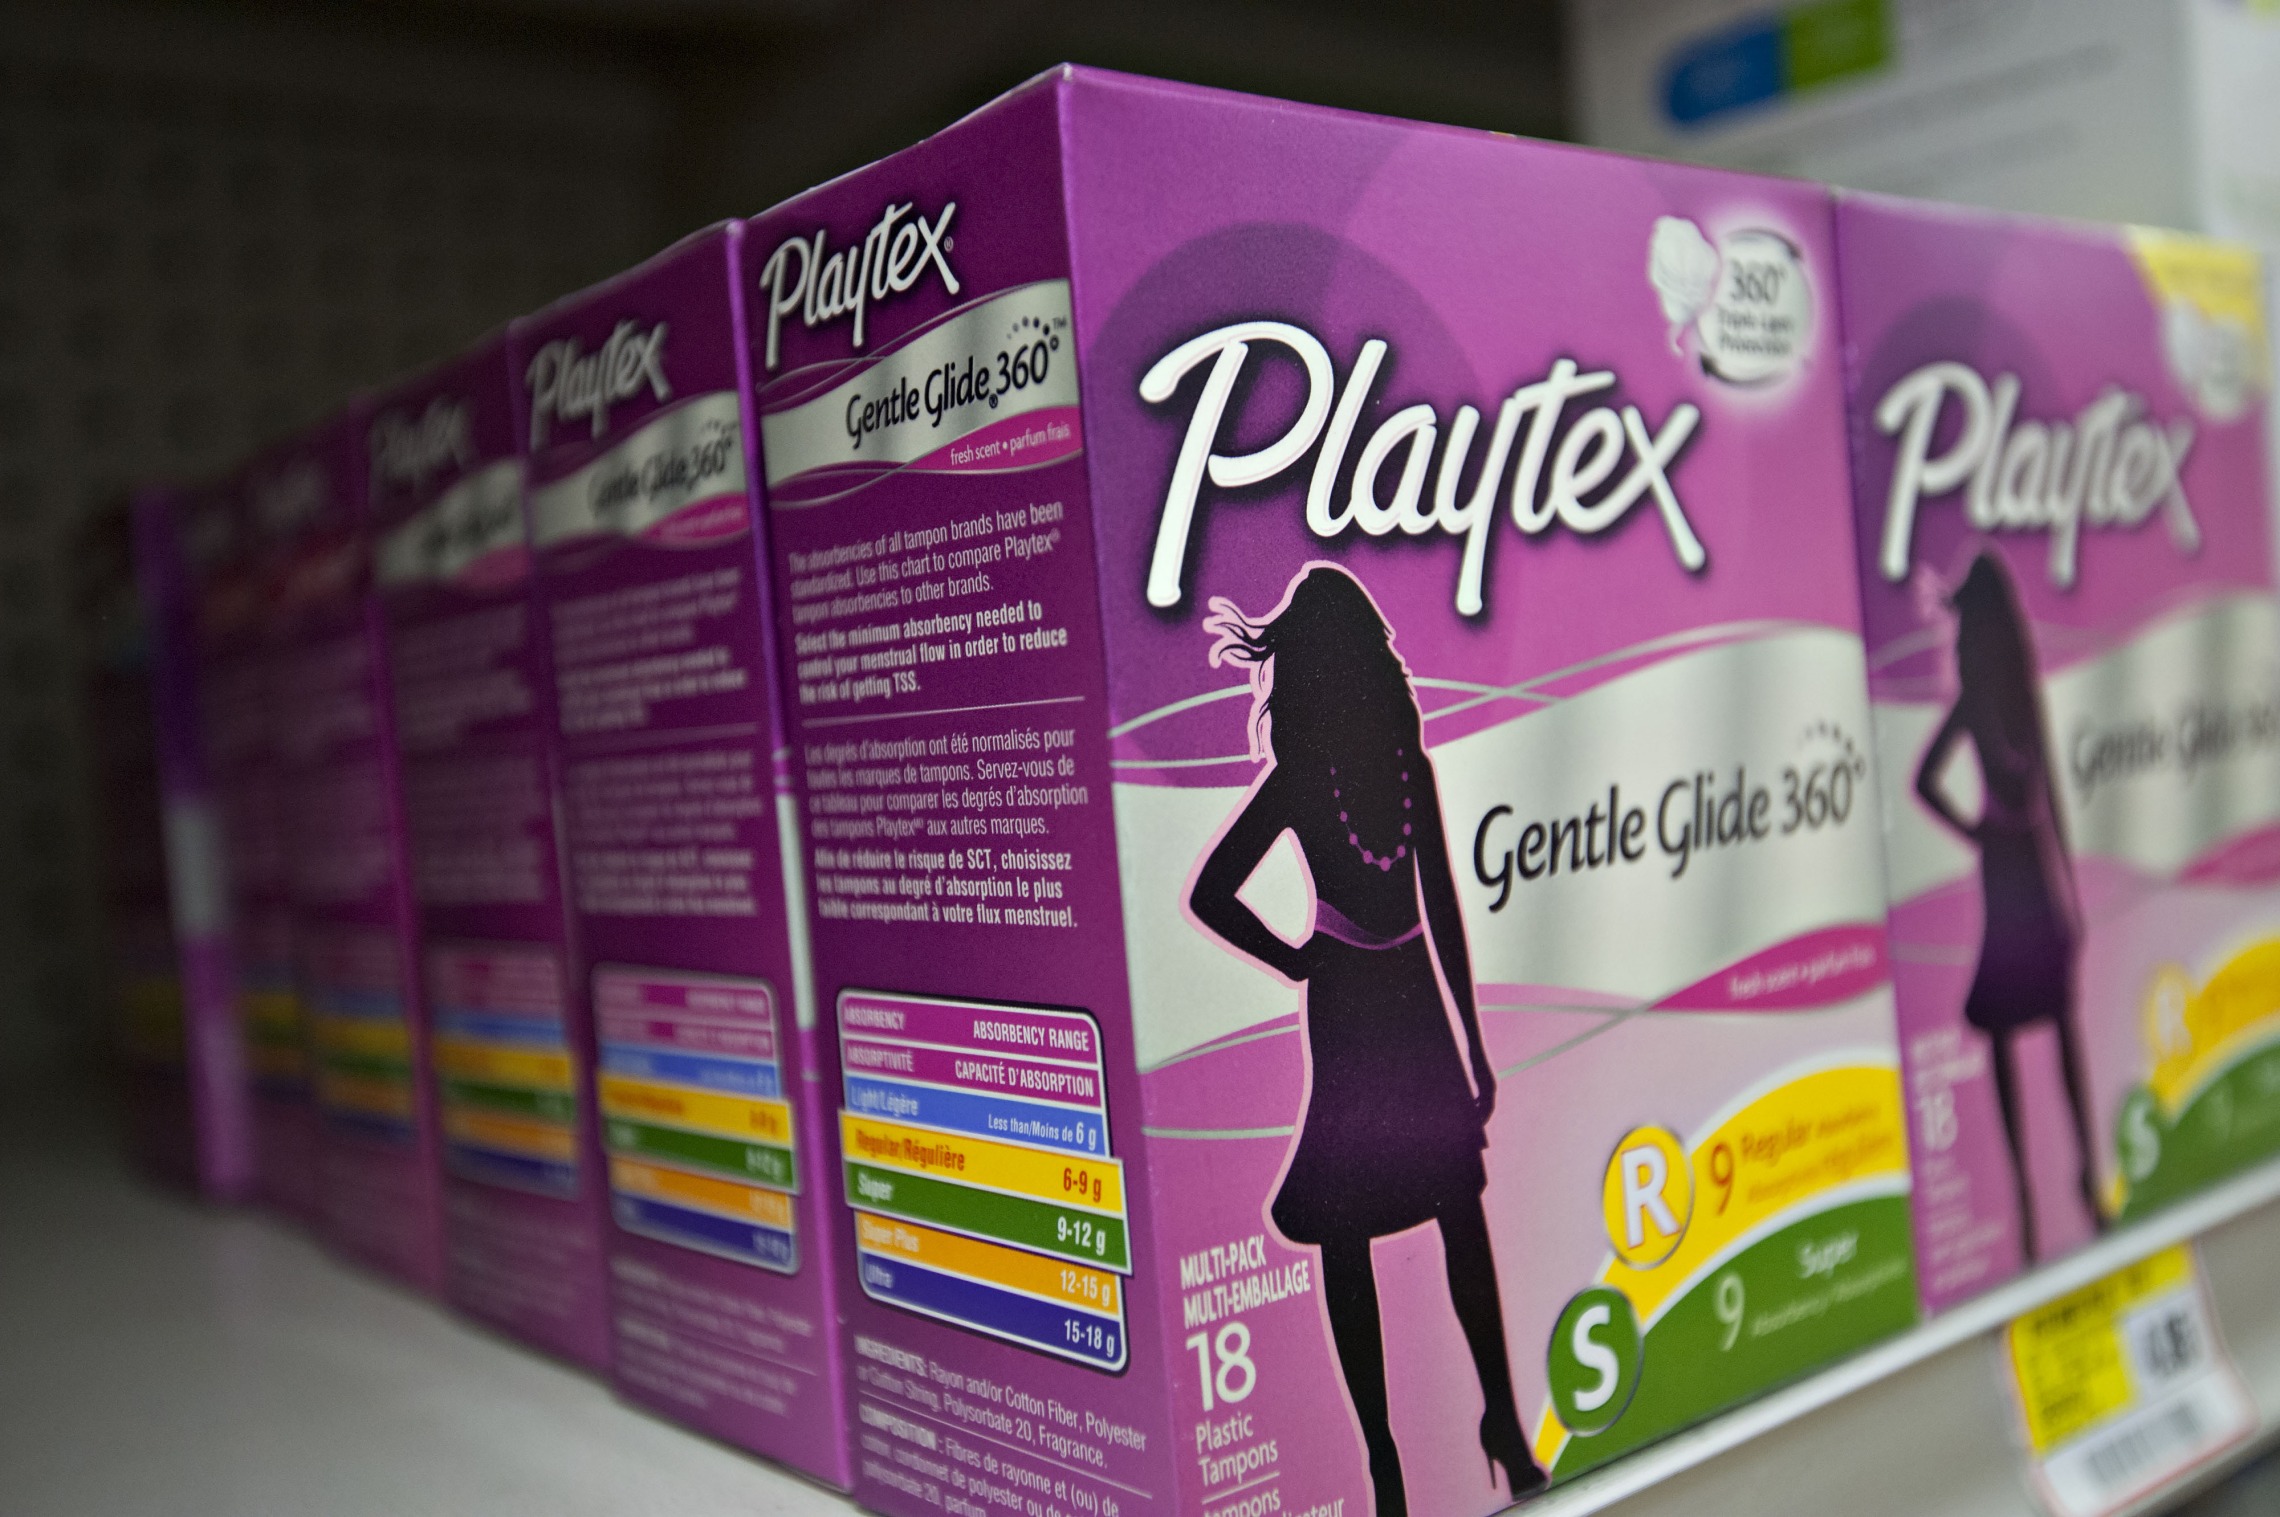 Tampon Shortage Reports Caused Sales to Jump, Edgewell Says - Bloomberg